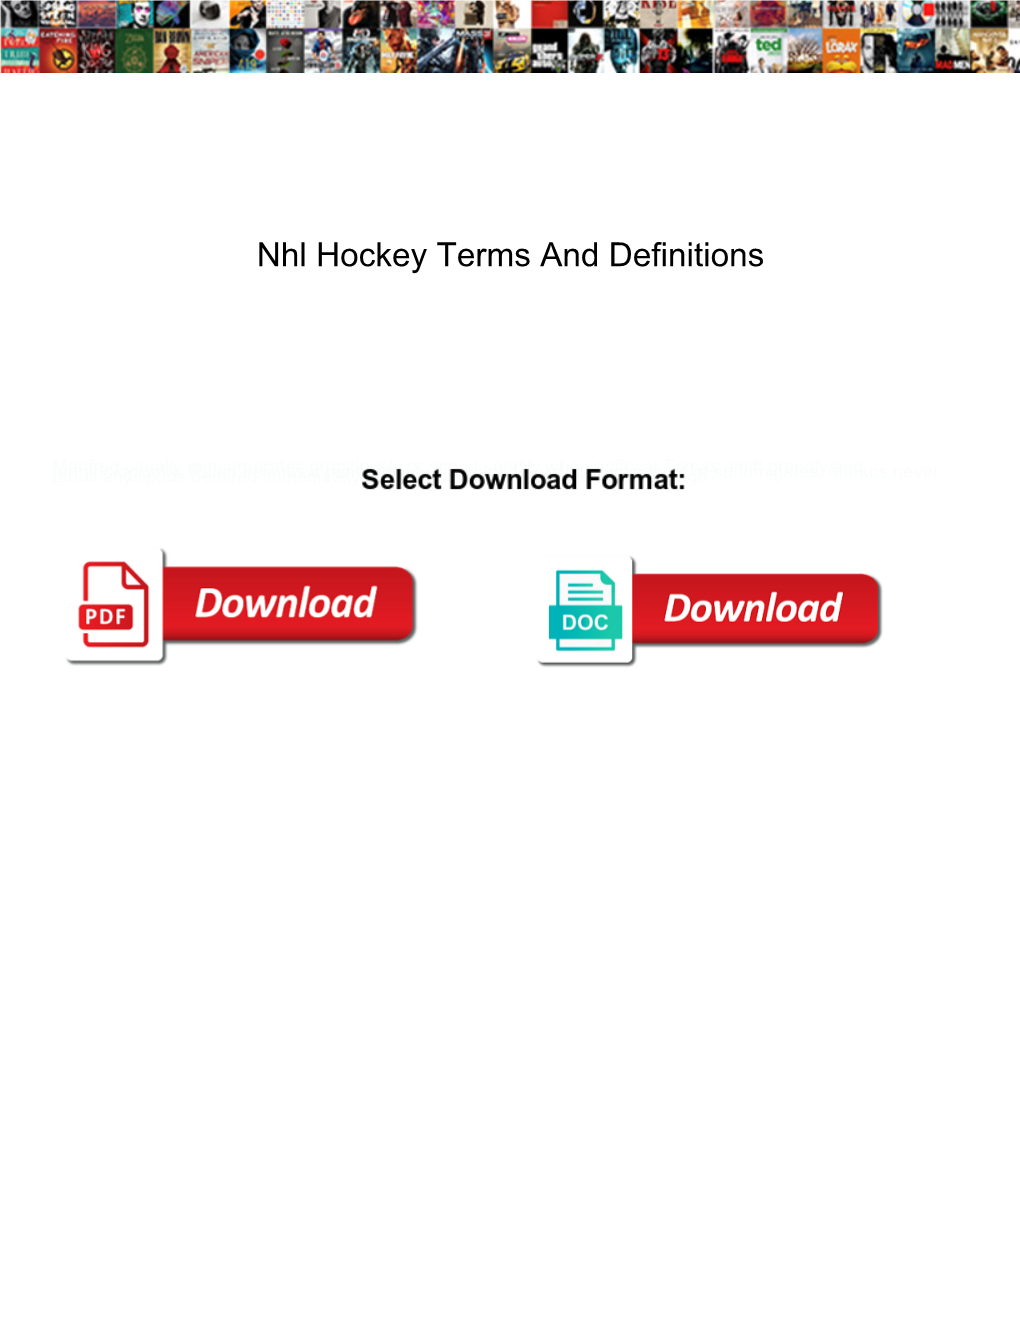 Nhl Hockey Terms and Definitions